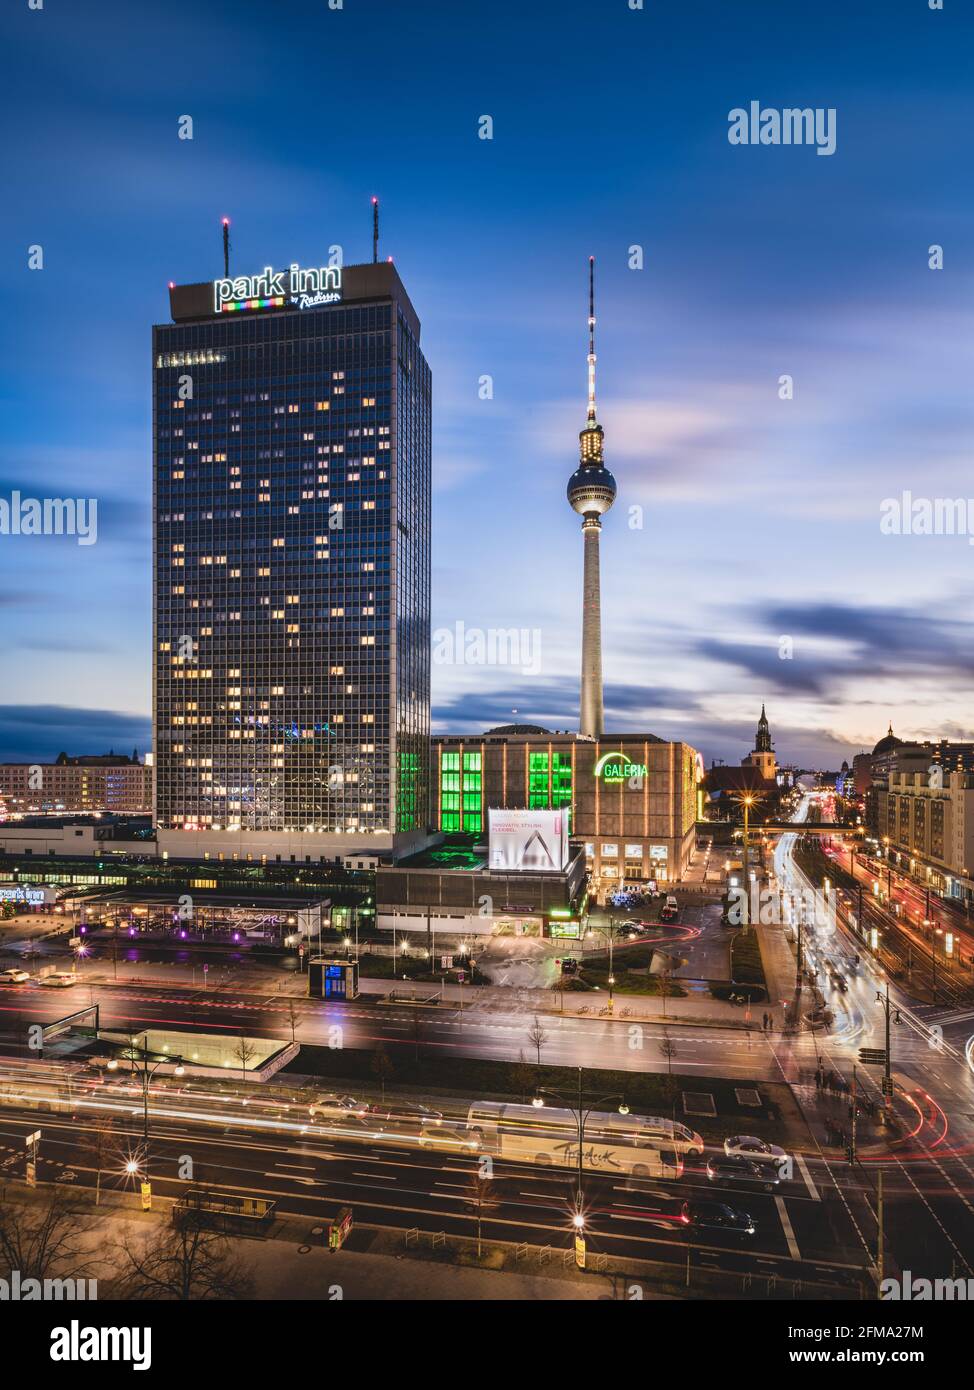 View of the illuminated streets of Berlin with the TV tower and Alexanderplatz at night. Stock Photo